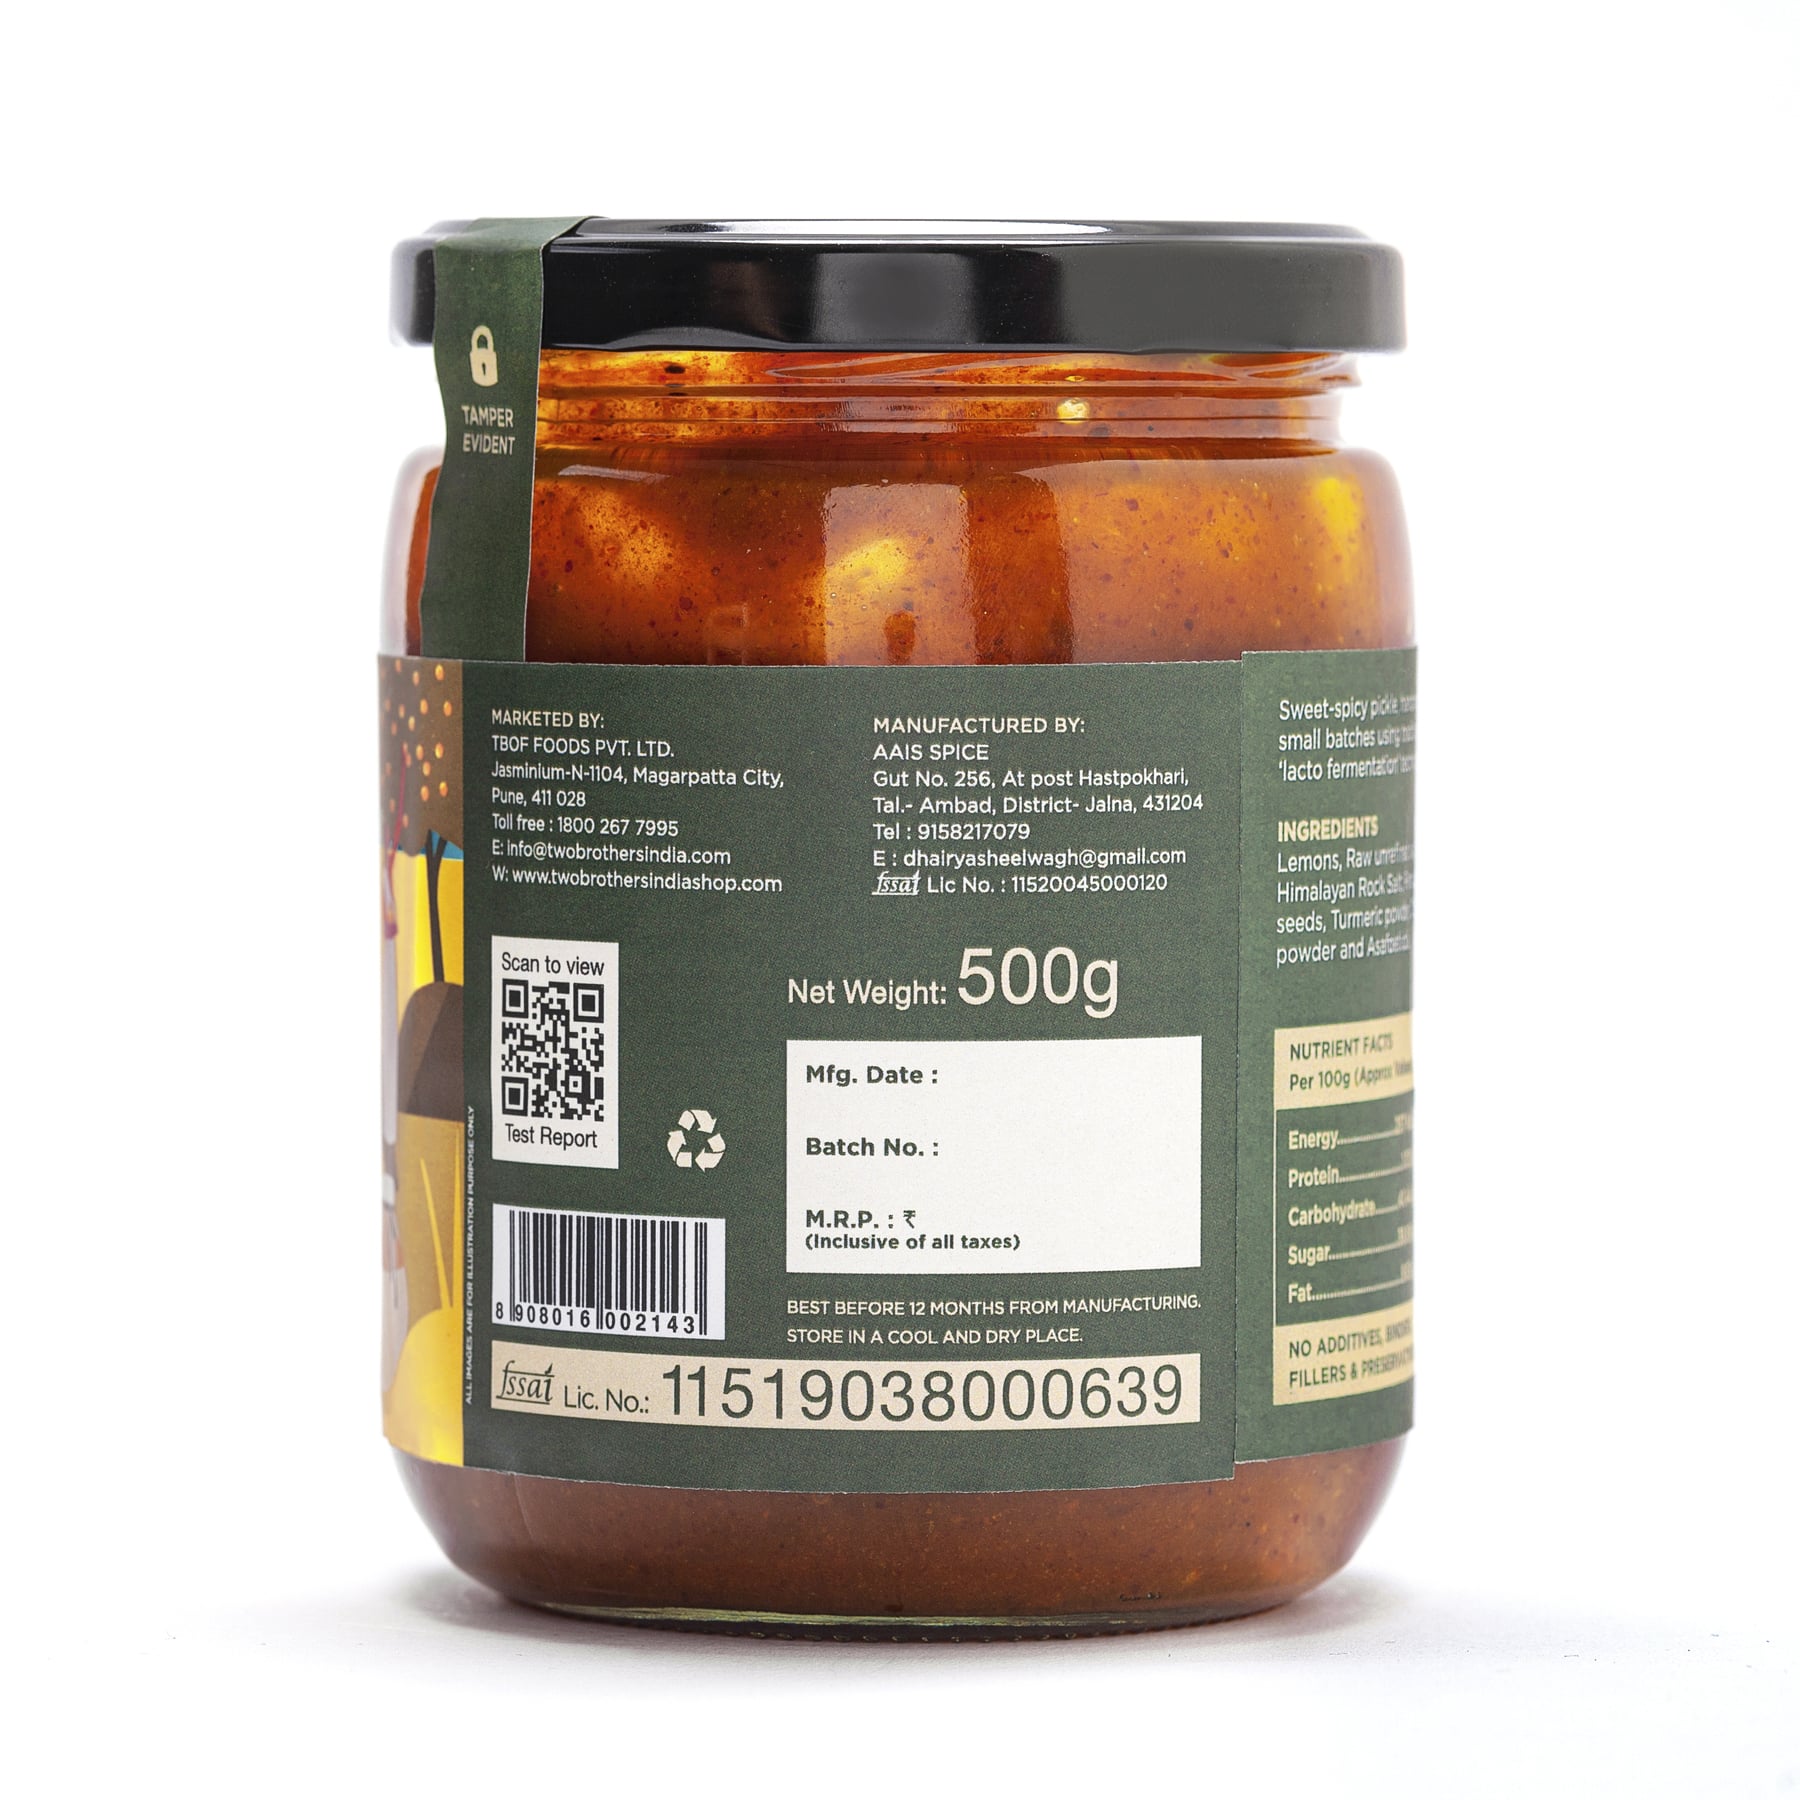 Buy Amorearth Lemon Pickle - Two brothers organic farm online